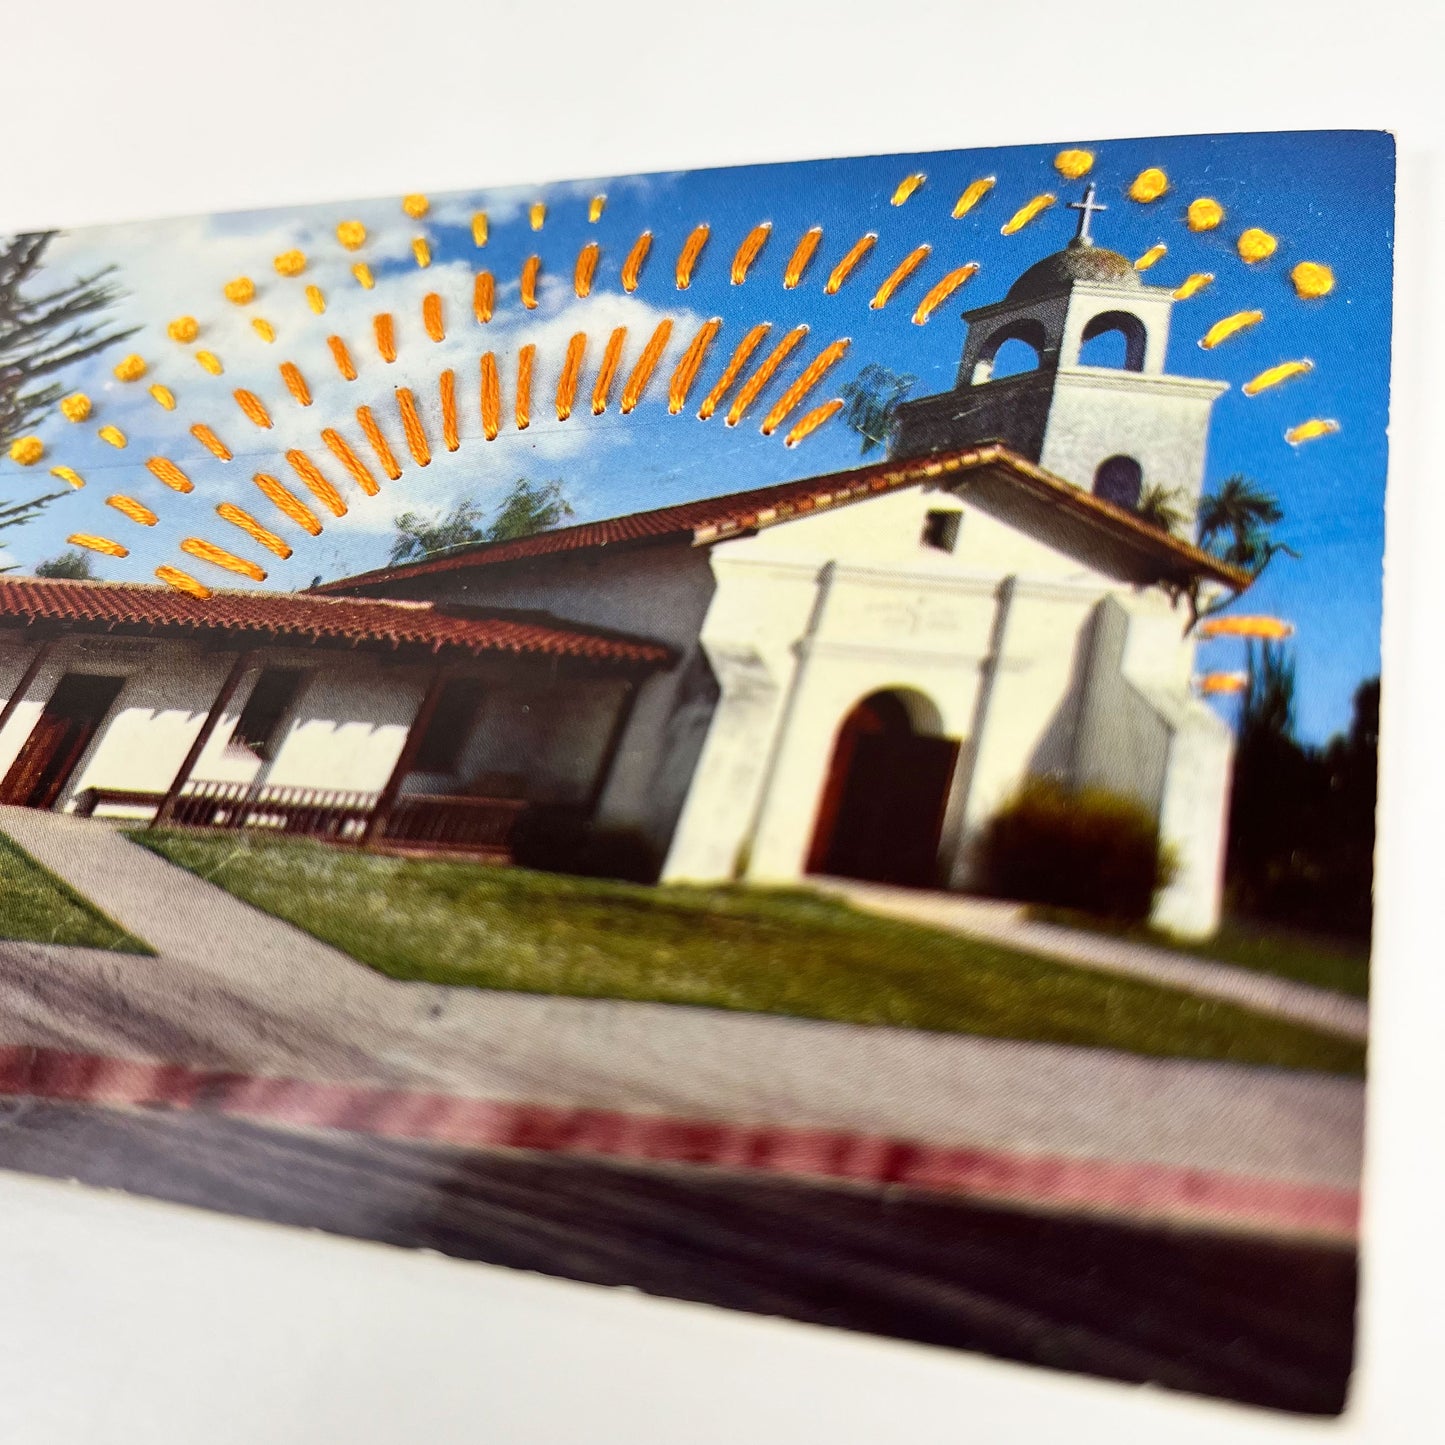 close up angled view of an old postcard of a mission building in Santa Cruz, with hand embroidered dashed lines and french knots resembling sun beams in oranges and yellows, stitched in the background on the sky only, the postcard is sitting on a white background